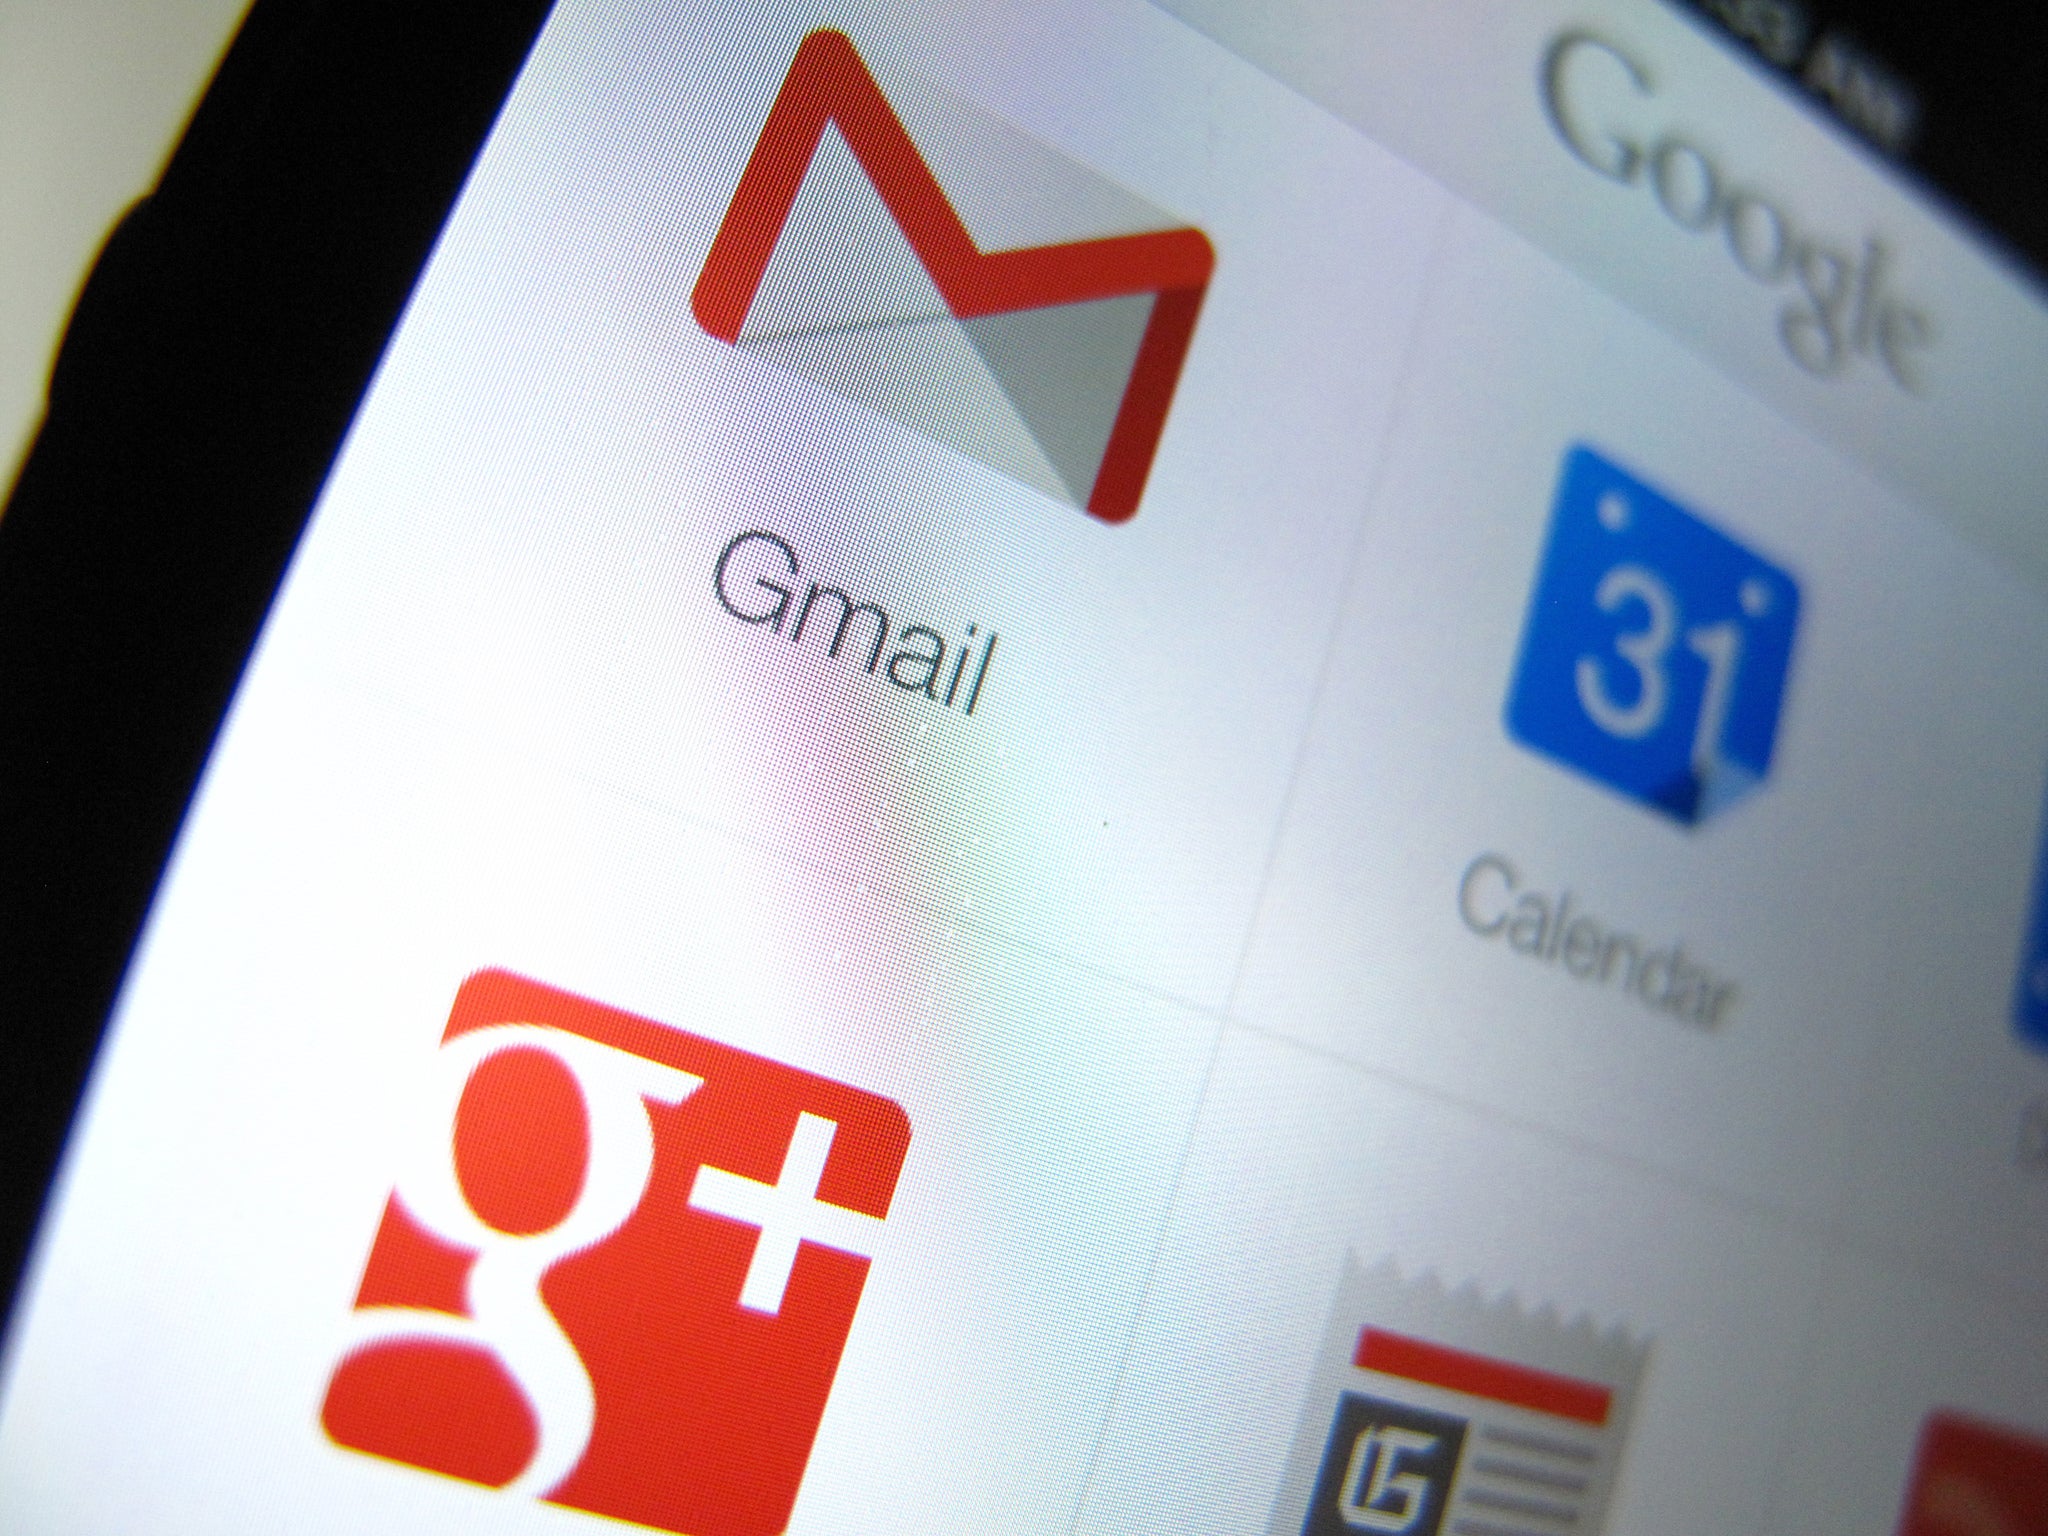 Google apps are shown on an Apple iphone 5 in this photo illustration in Encinitas, California, April 16, 2013.